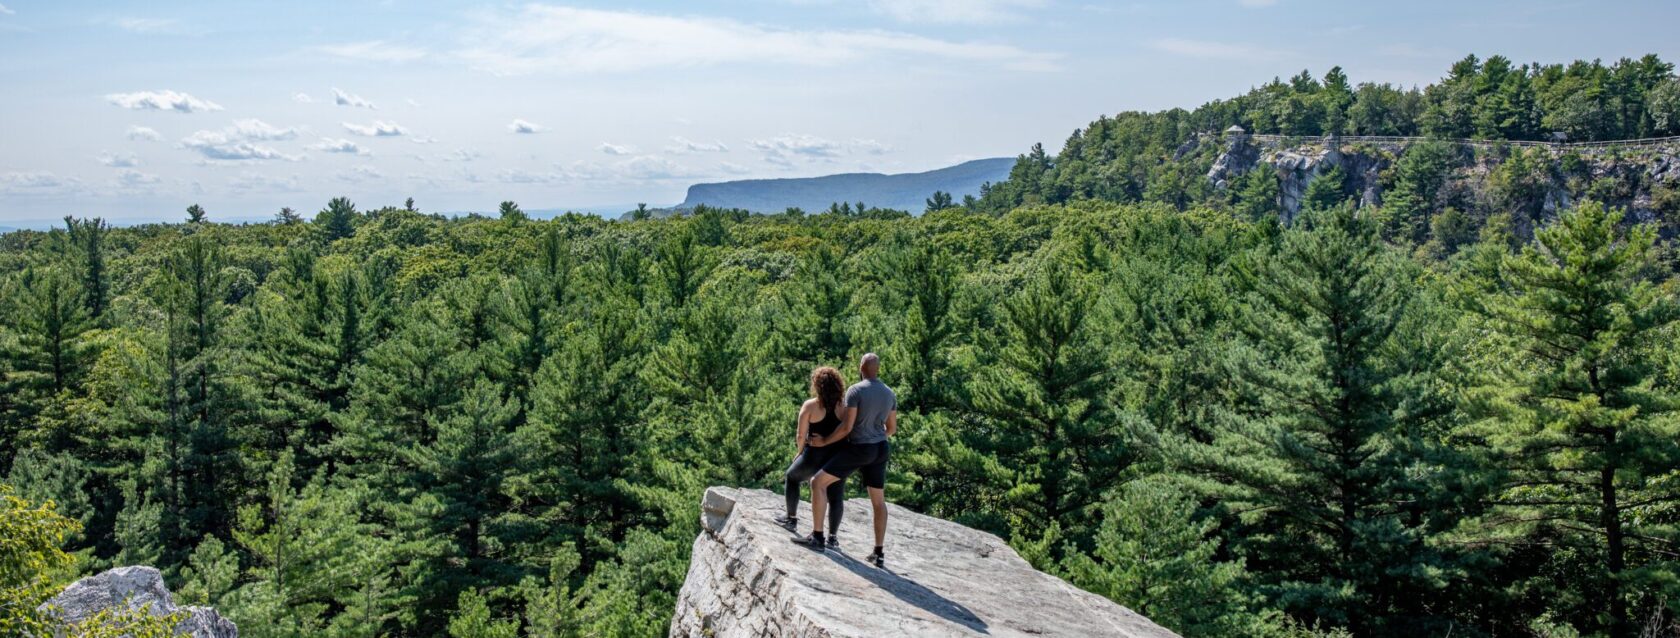 mohonk_a-22